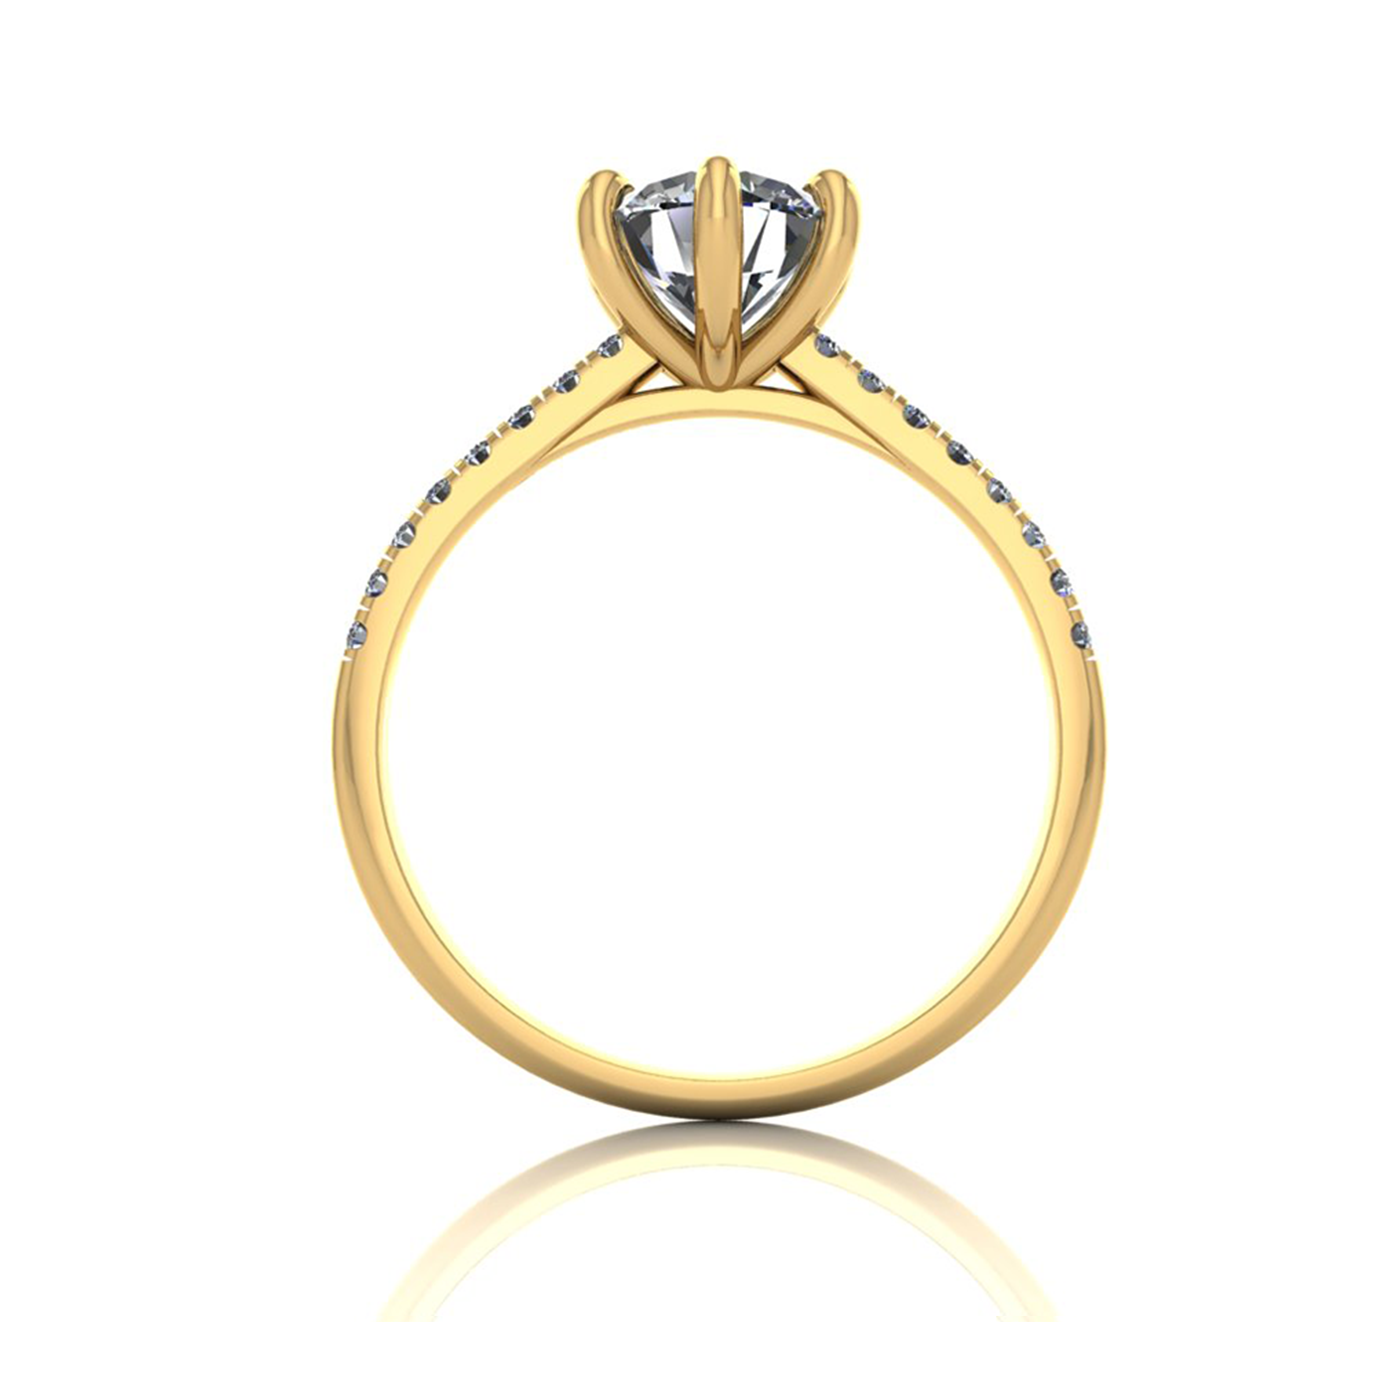 18K YELLOW GOLD 6 PRONGS ROUND CUT DIAMOND ENGAGEMENT RING WITH WHISPER THIN PAVÉ SET BAND